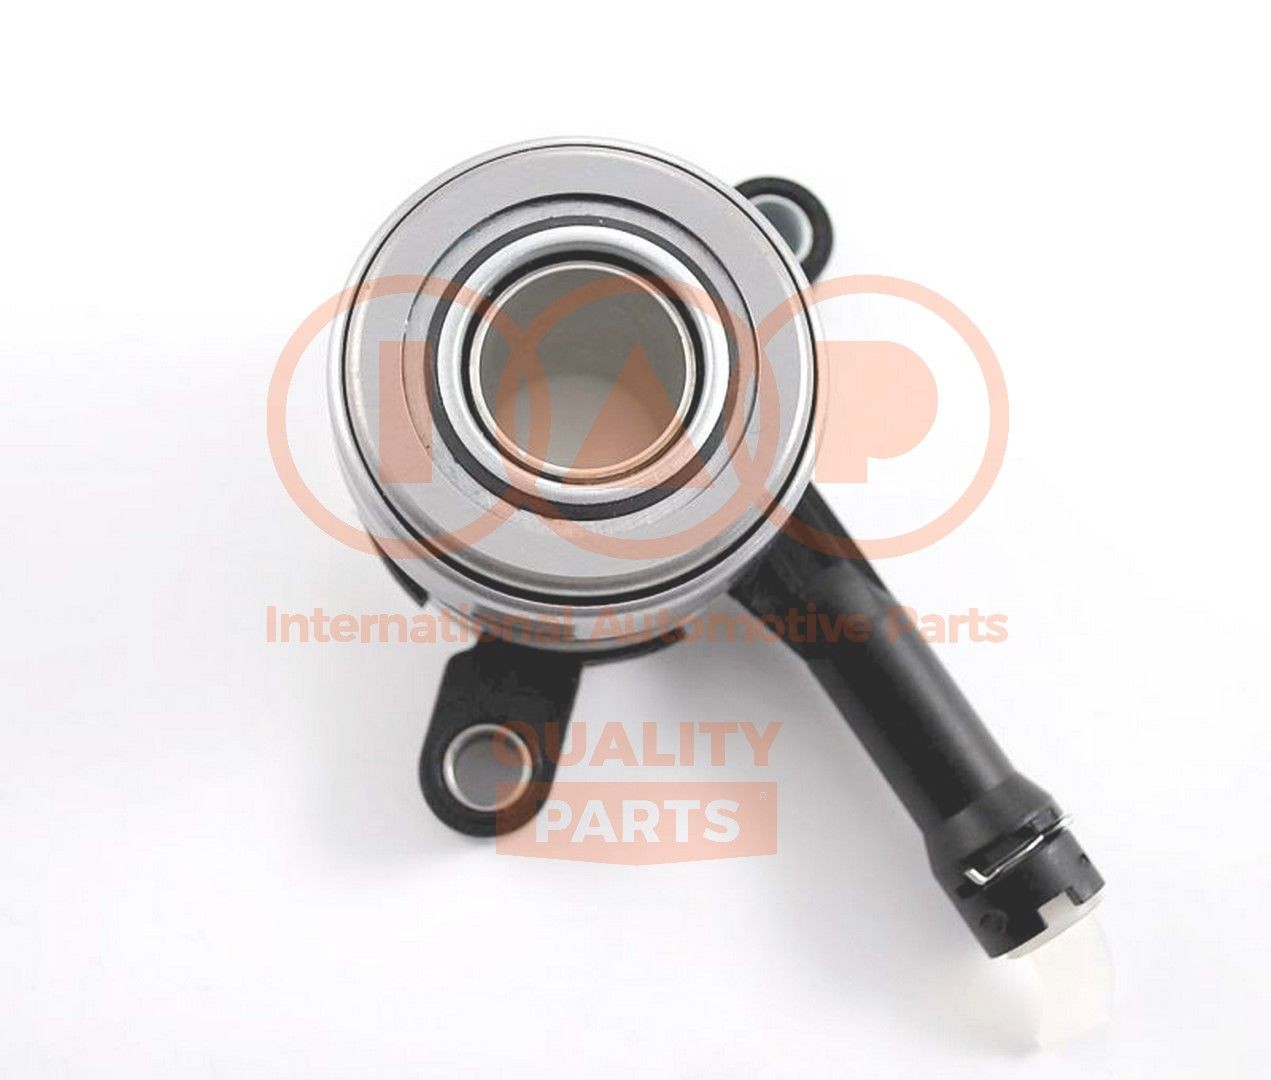 IAP QUALITY PARTS 204-13161 Renault MASTER 2010 Clutch bearing